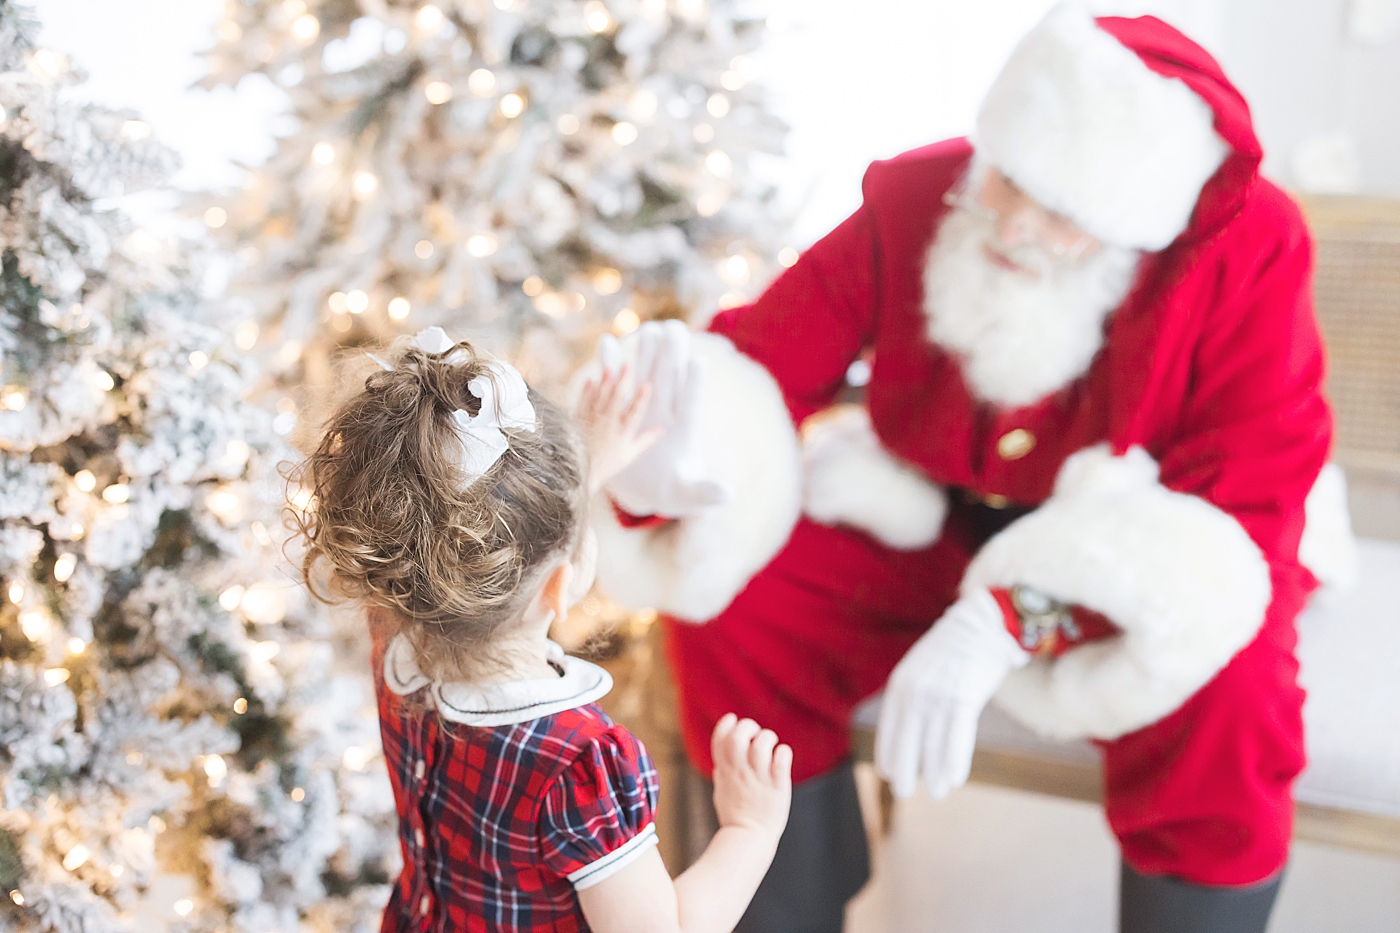 Little girl giving Santa a high five. Photo by Fresh Light Photography.